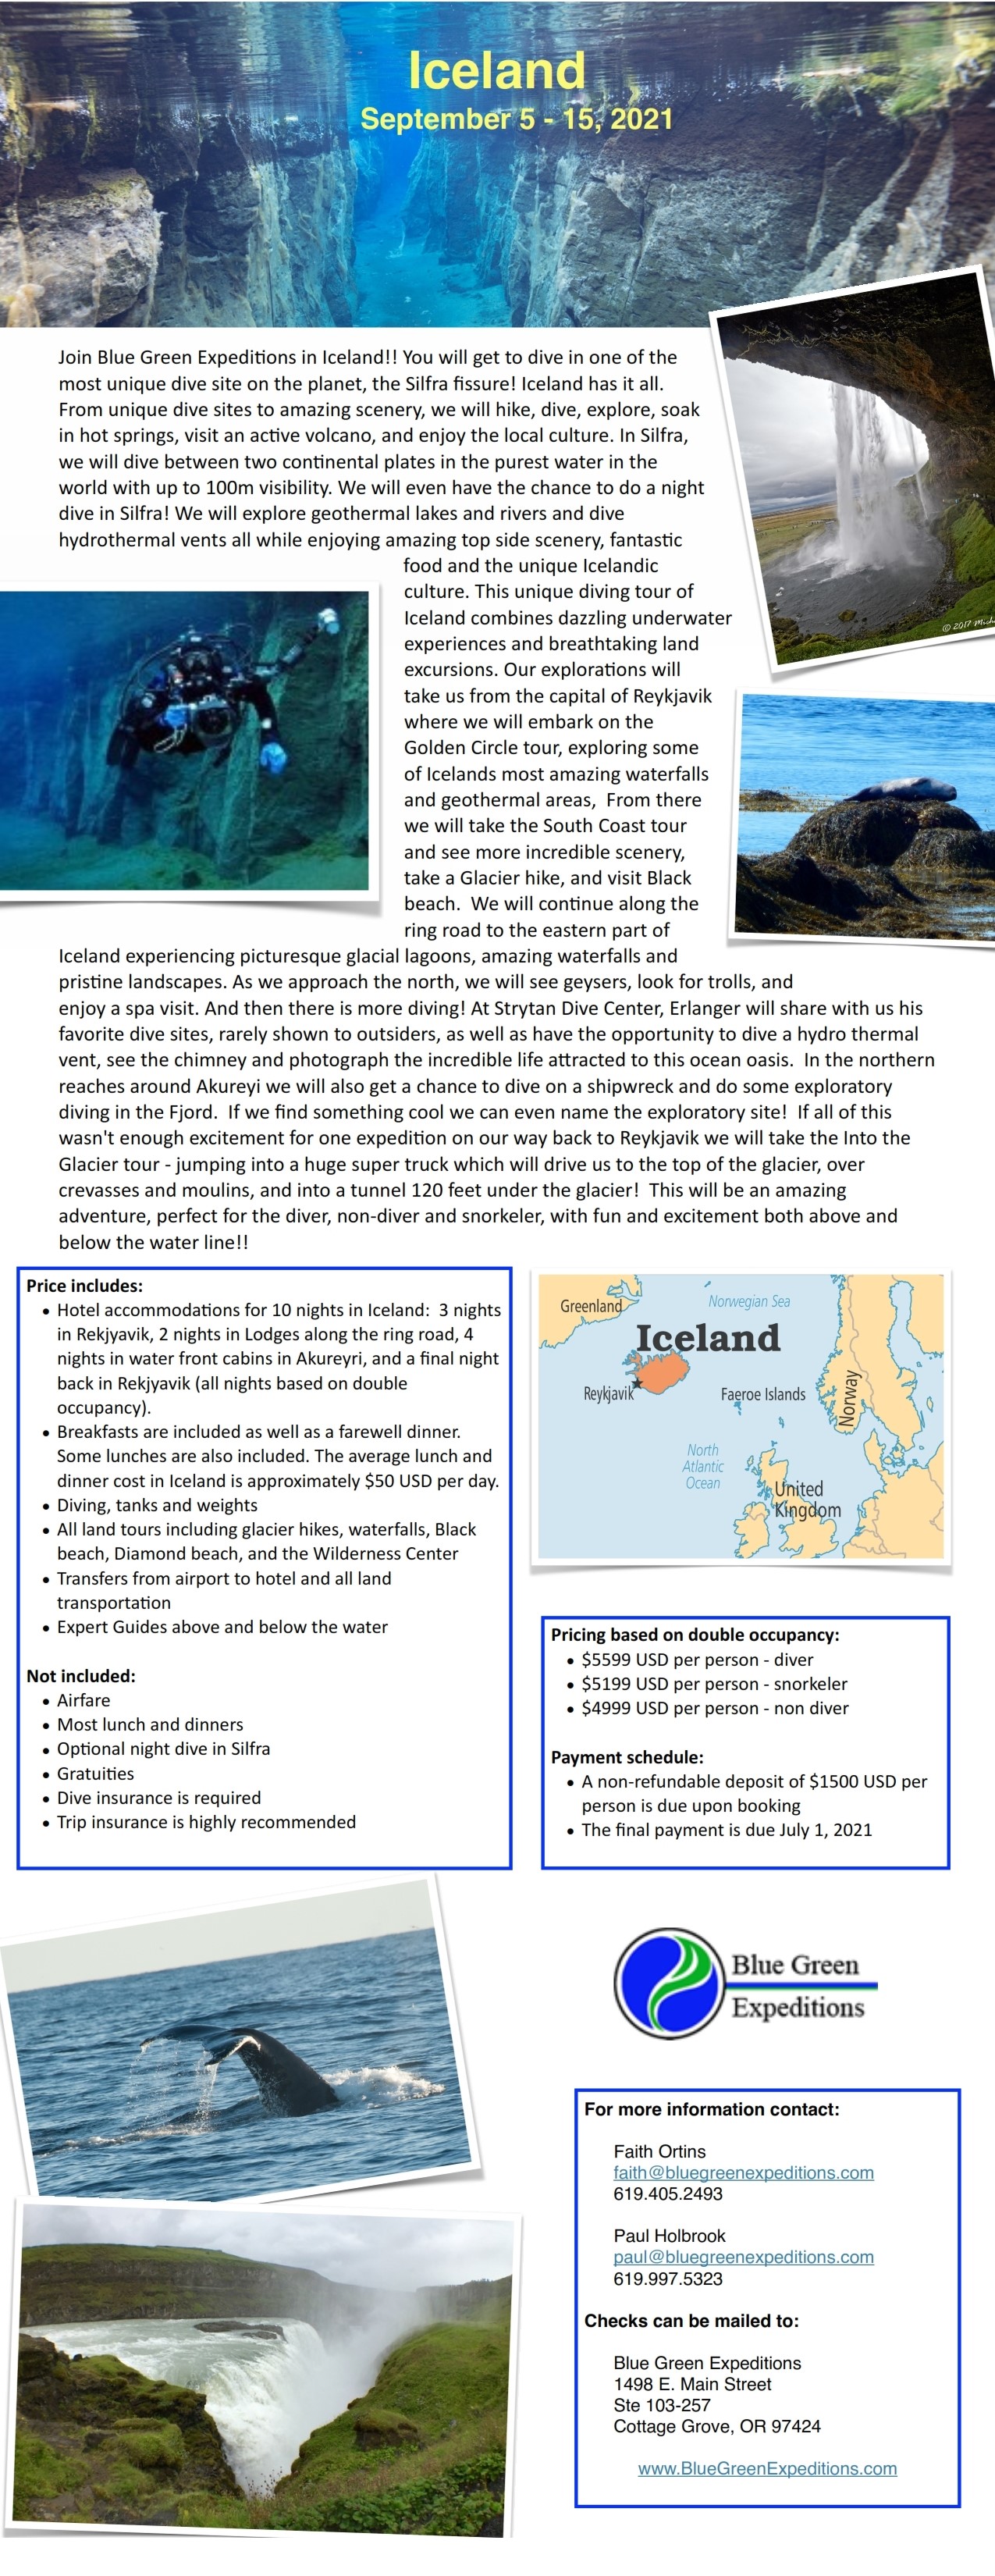 Iceland Expedition, September 5 - 15, 2021, cost and trip details. PDF flyer contains the same information.